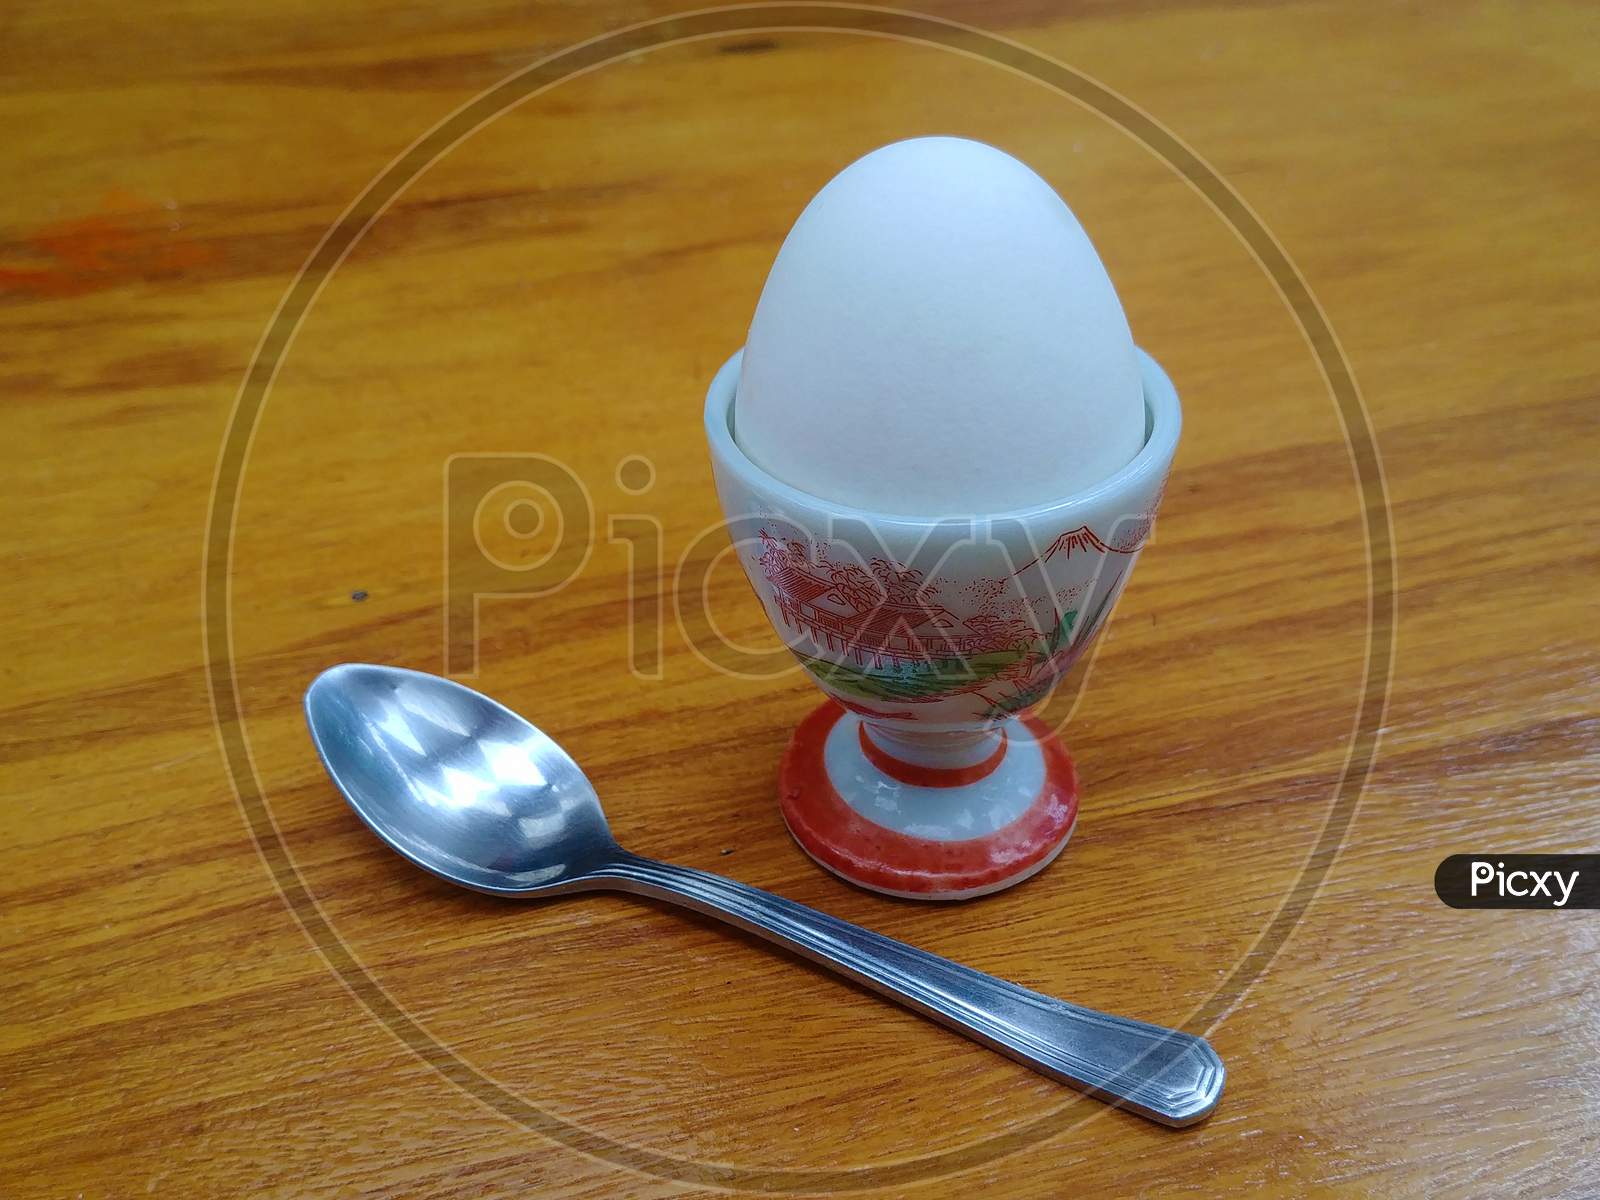 Delicate boiled egg holder with a spoon on the wooden table.